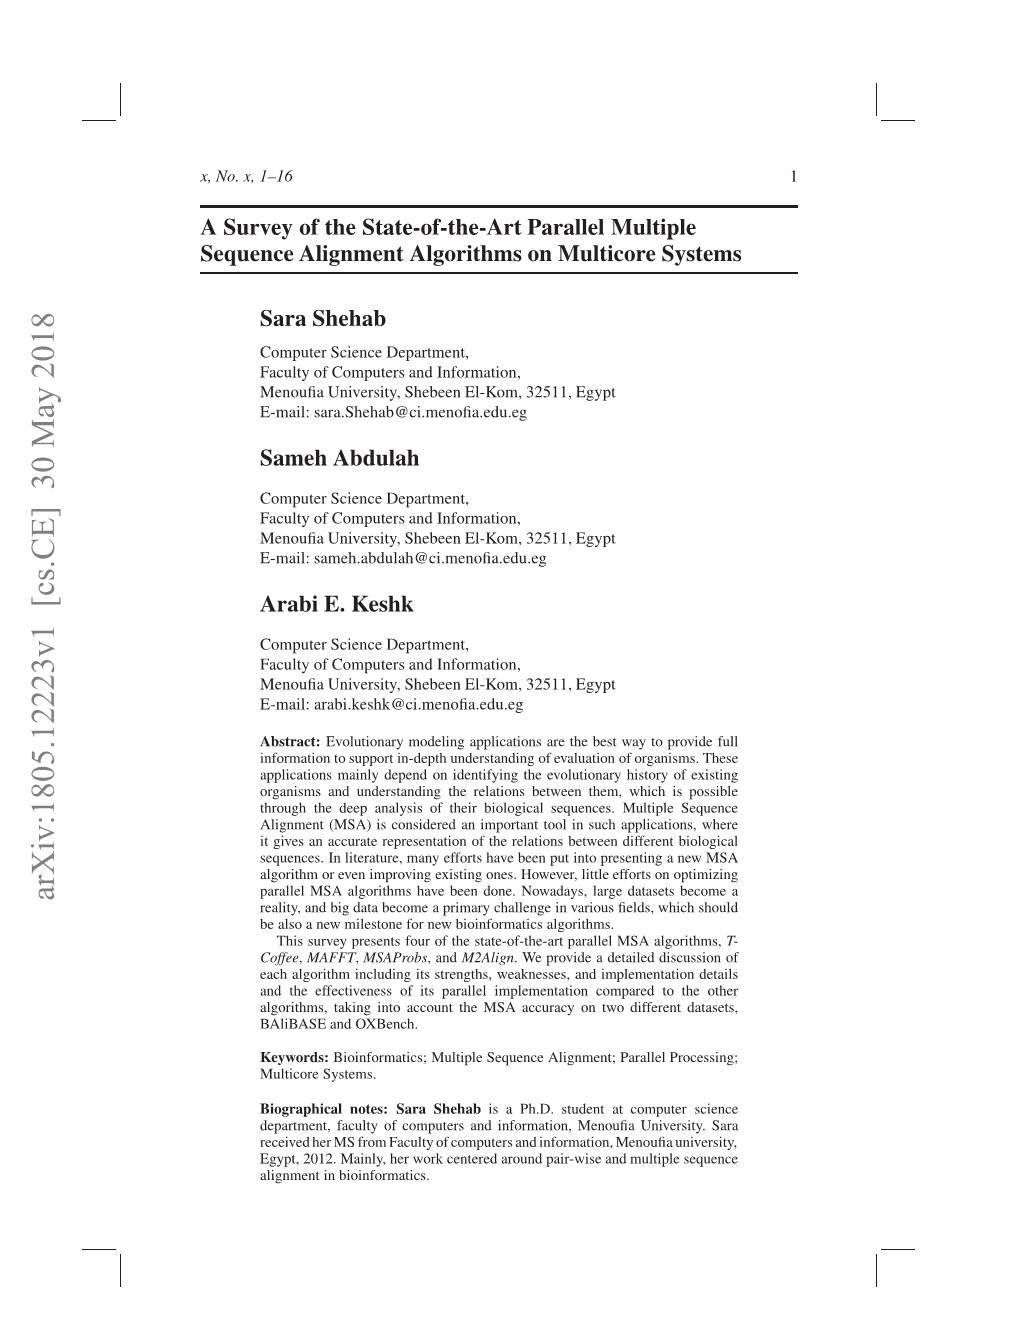 A Survey of the State-Of-The-Art Parallel Multiple Sequence